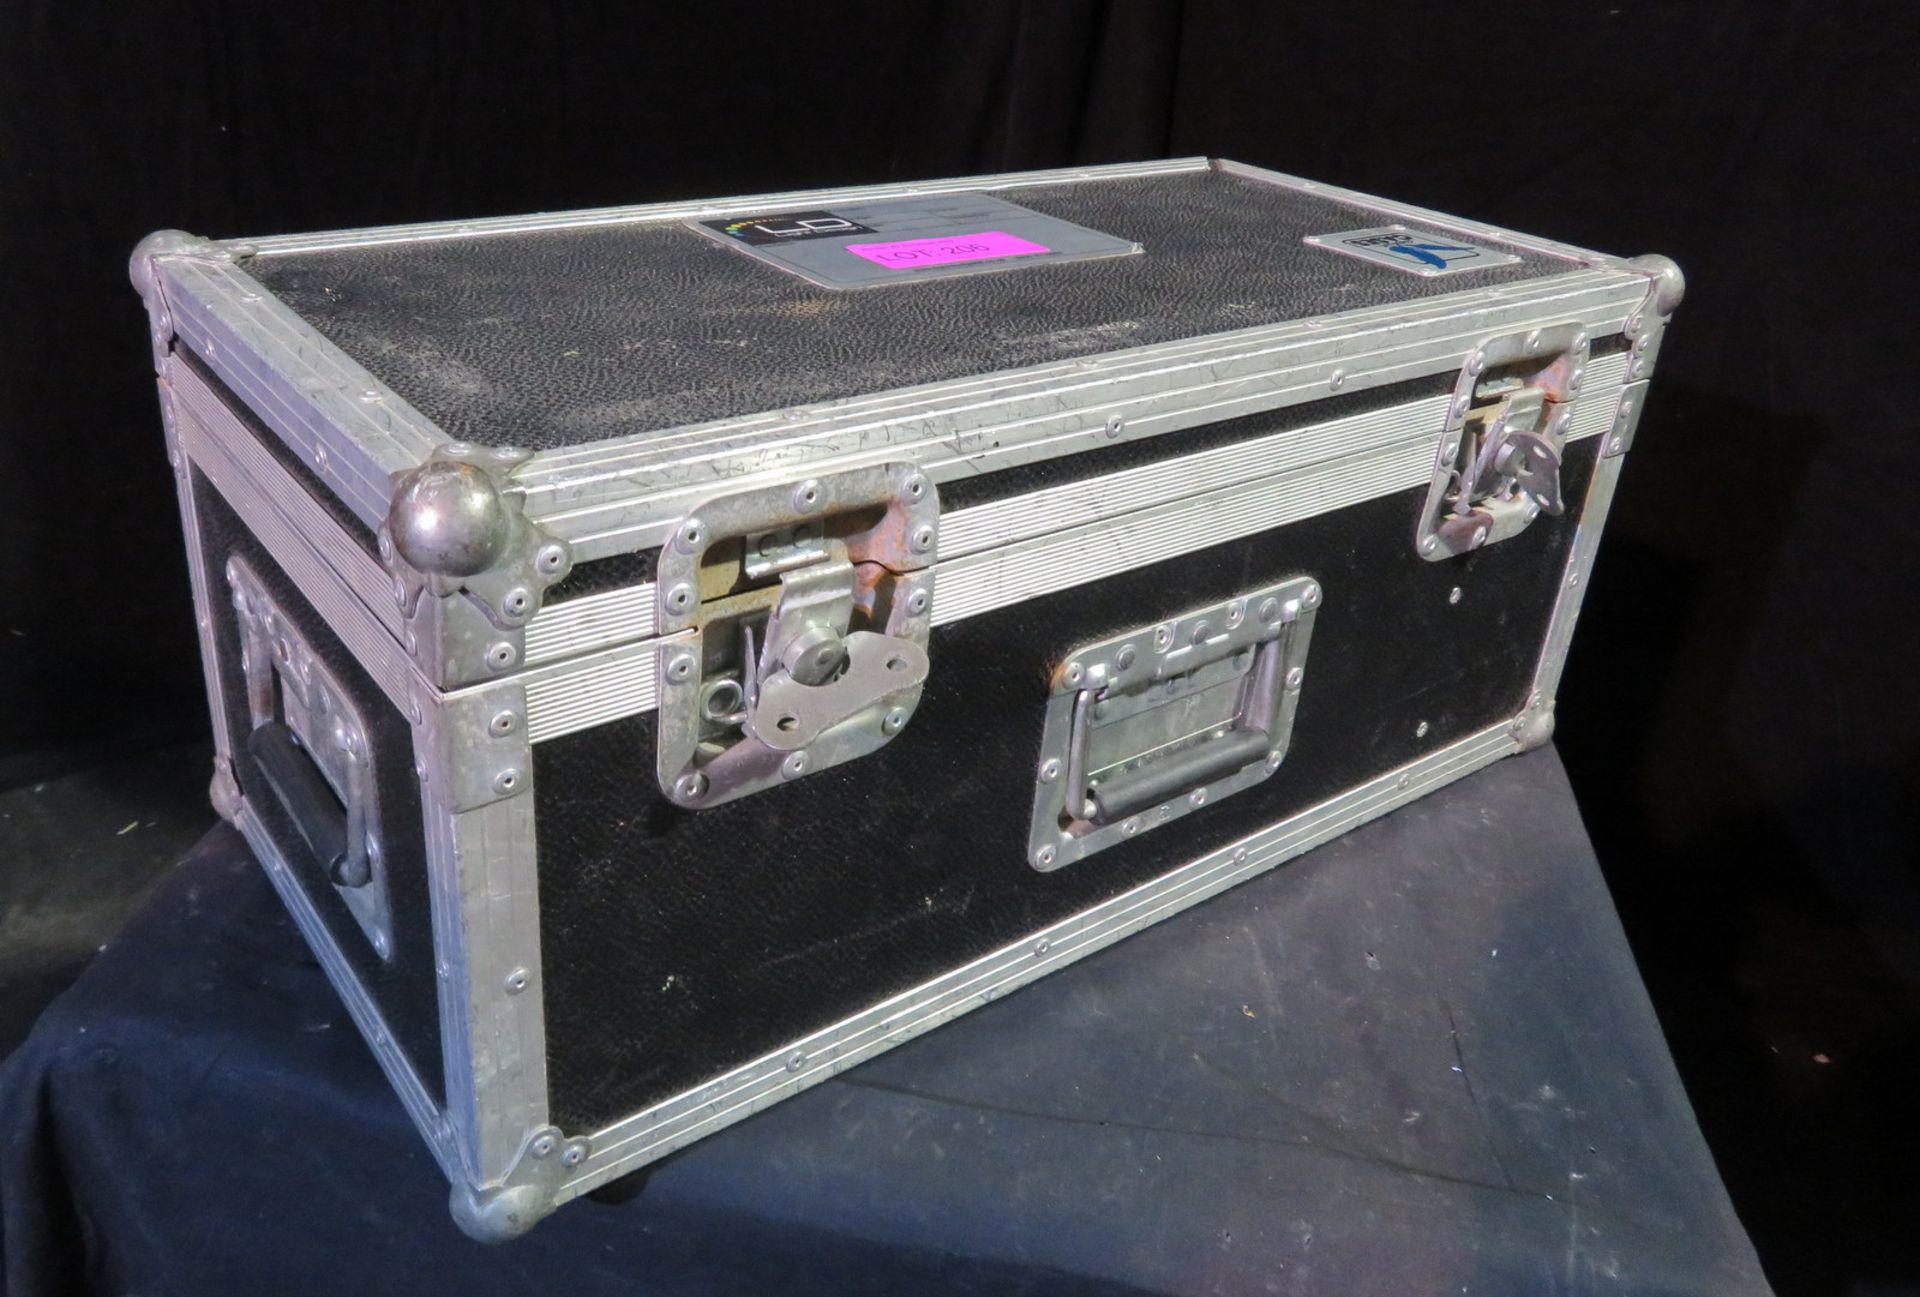 Small Flightcase internal dimensions: 59x28x19cm (LxDxH) with internal divider - Image 2 of 4